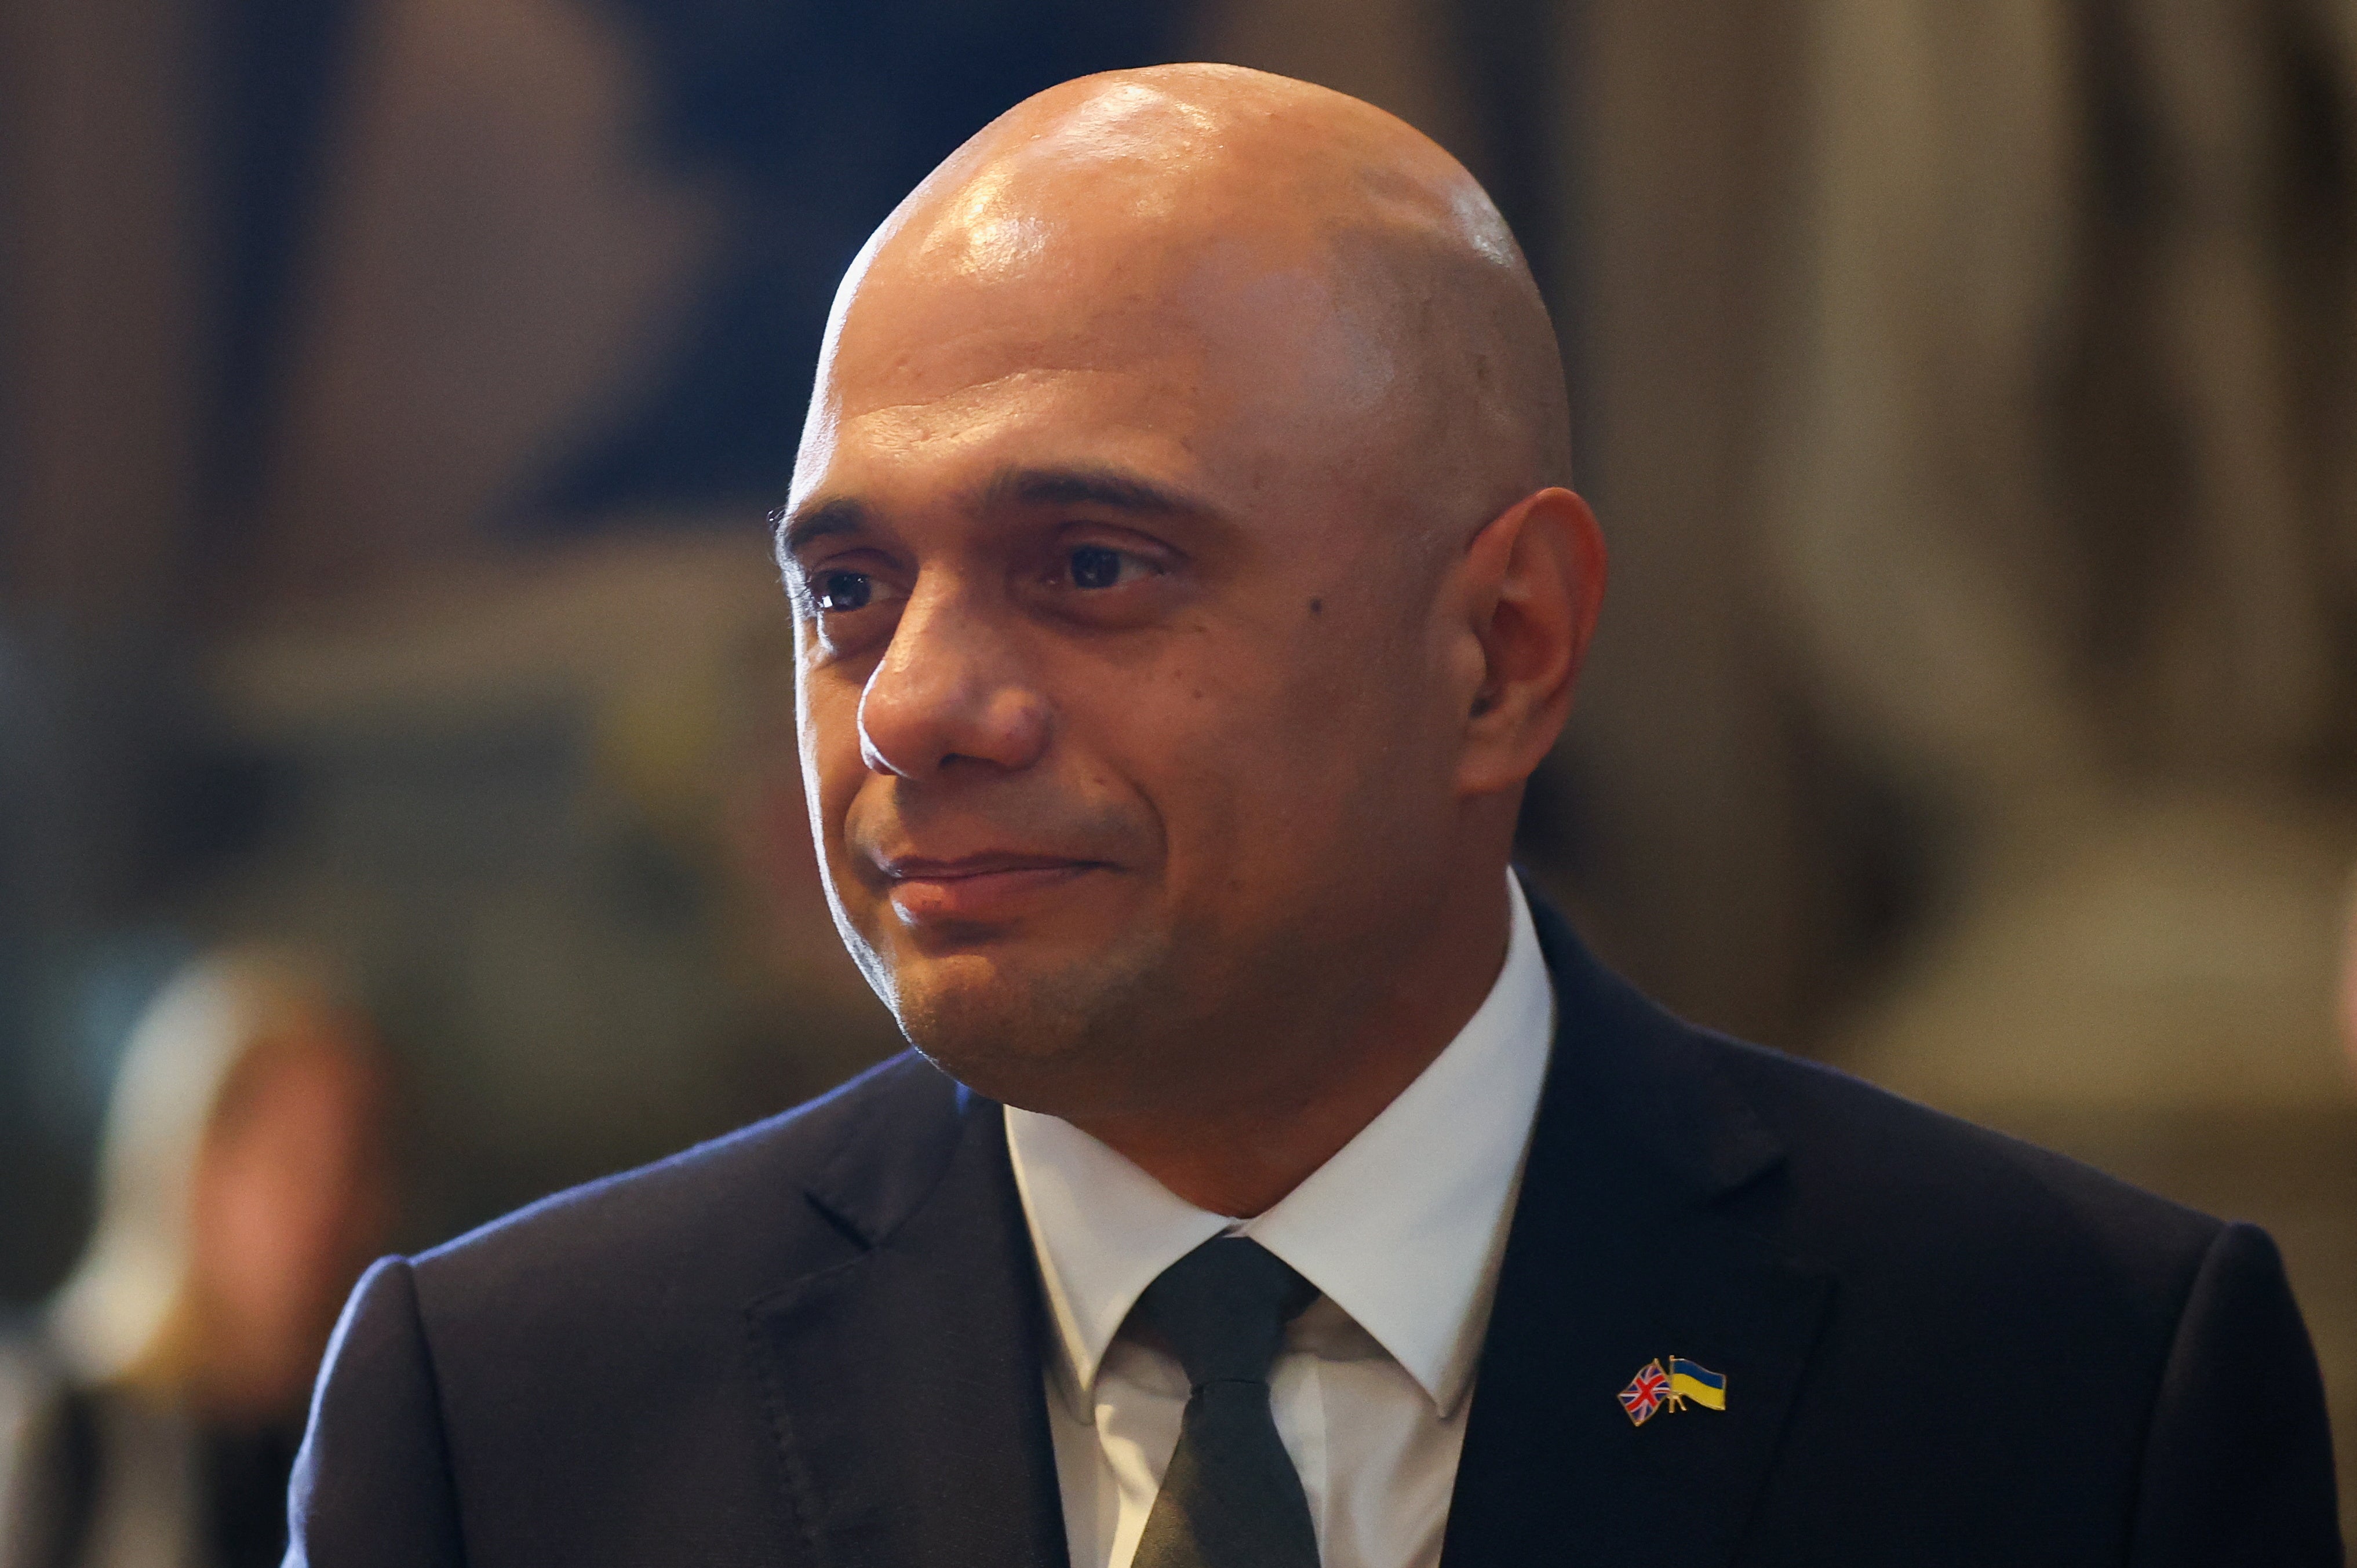 Sajid Javid reveals his older brother died by suicide while he was Home Secretary